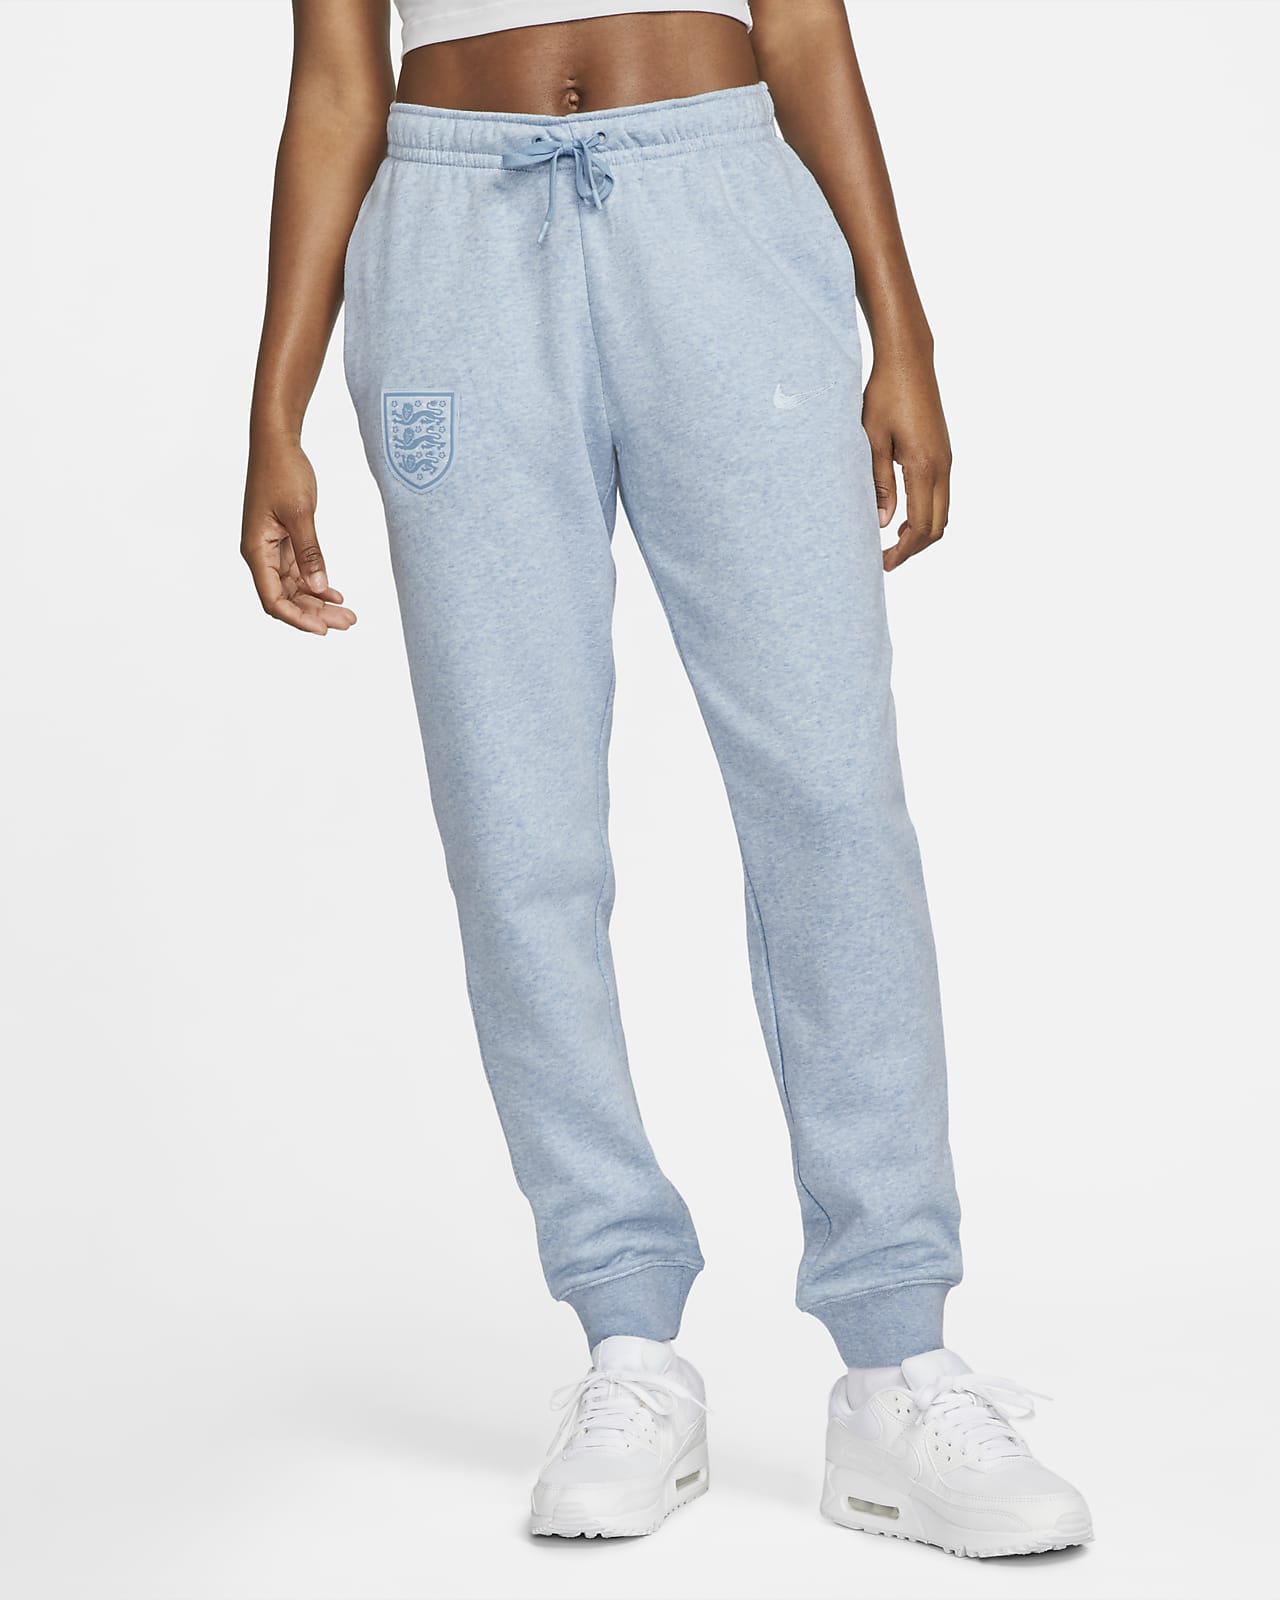 https://static.nike.com/a/images/t_PDP_1280_v1/f_auto,q_auto:eco/be76950c-c0f4-4648-ae46-7f2fc3a22503/pantalon-taille-mi-haute-angleterre-club-fleece-pour-XCNdcZ.png